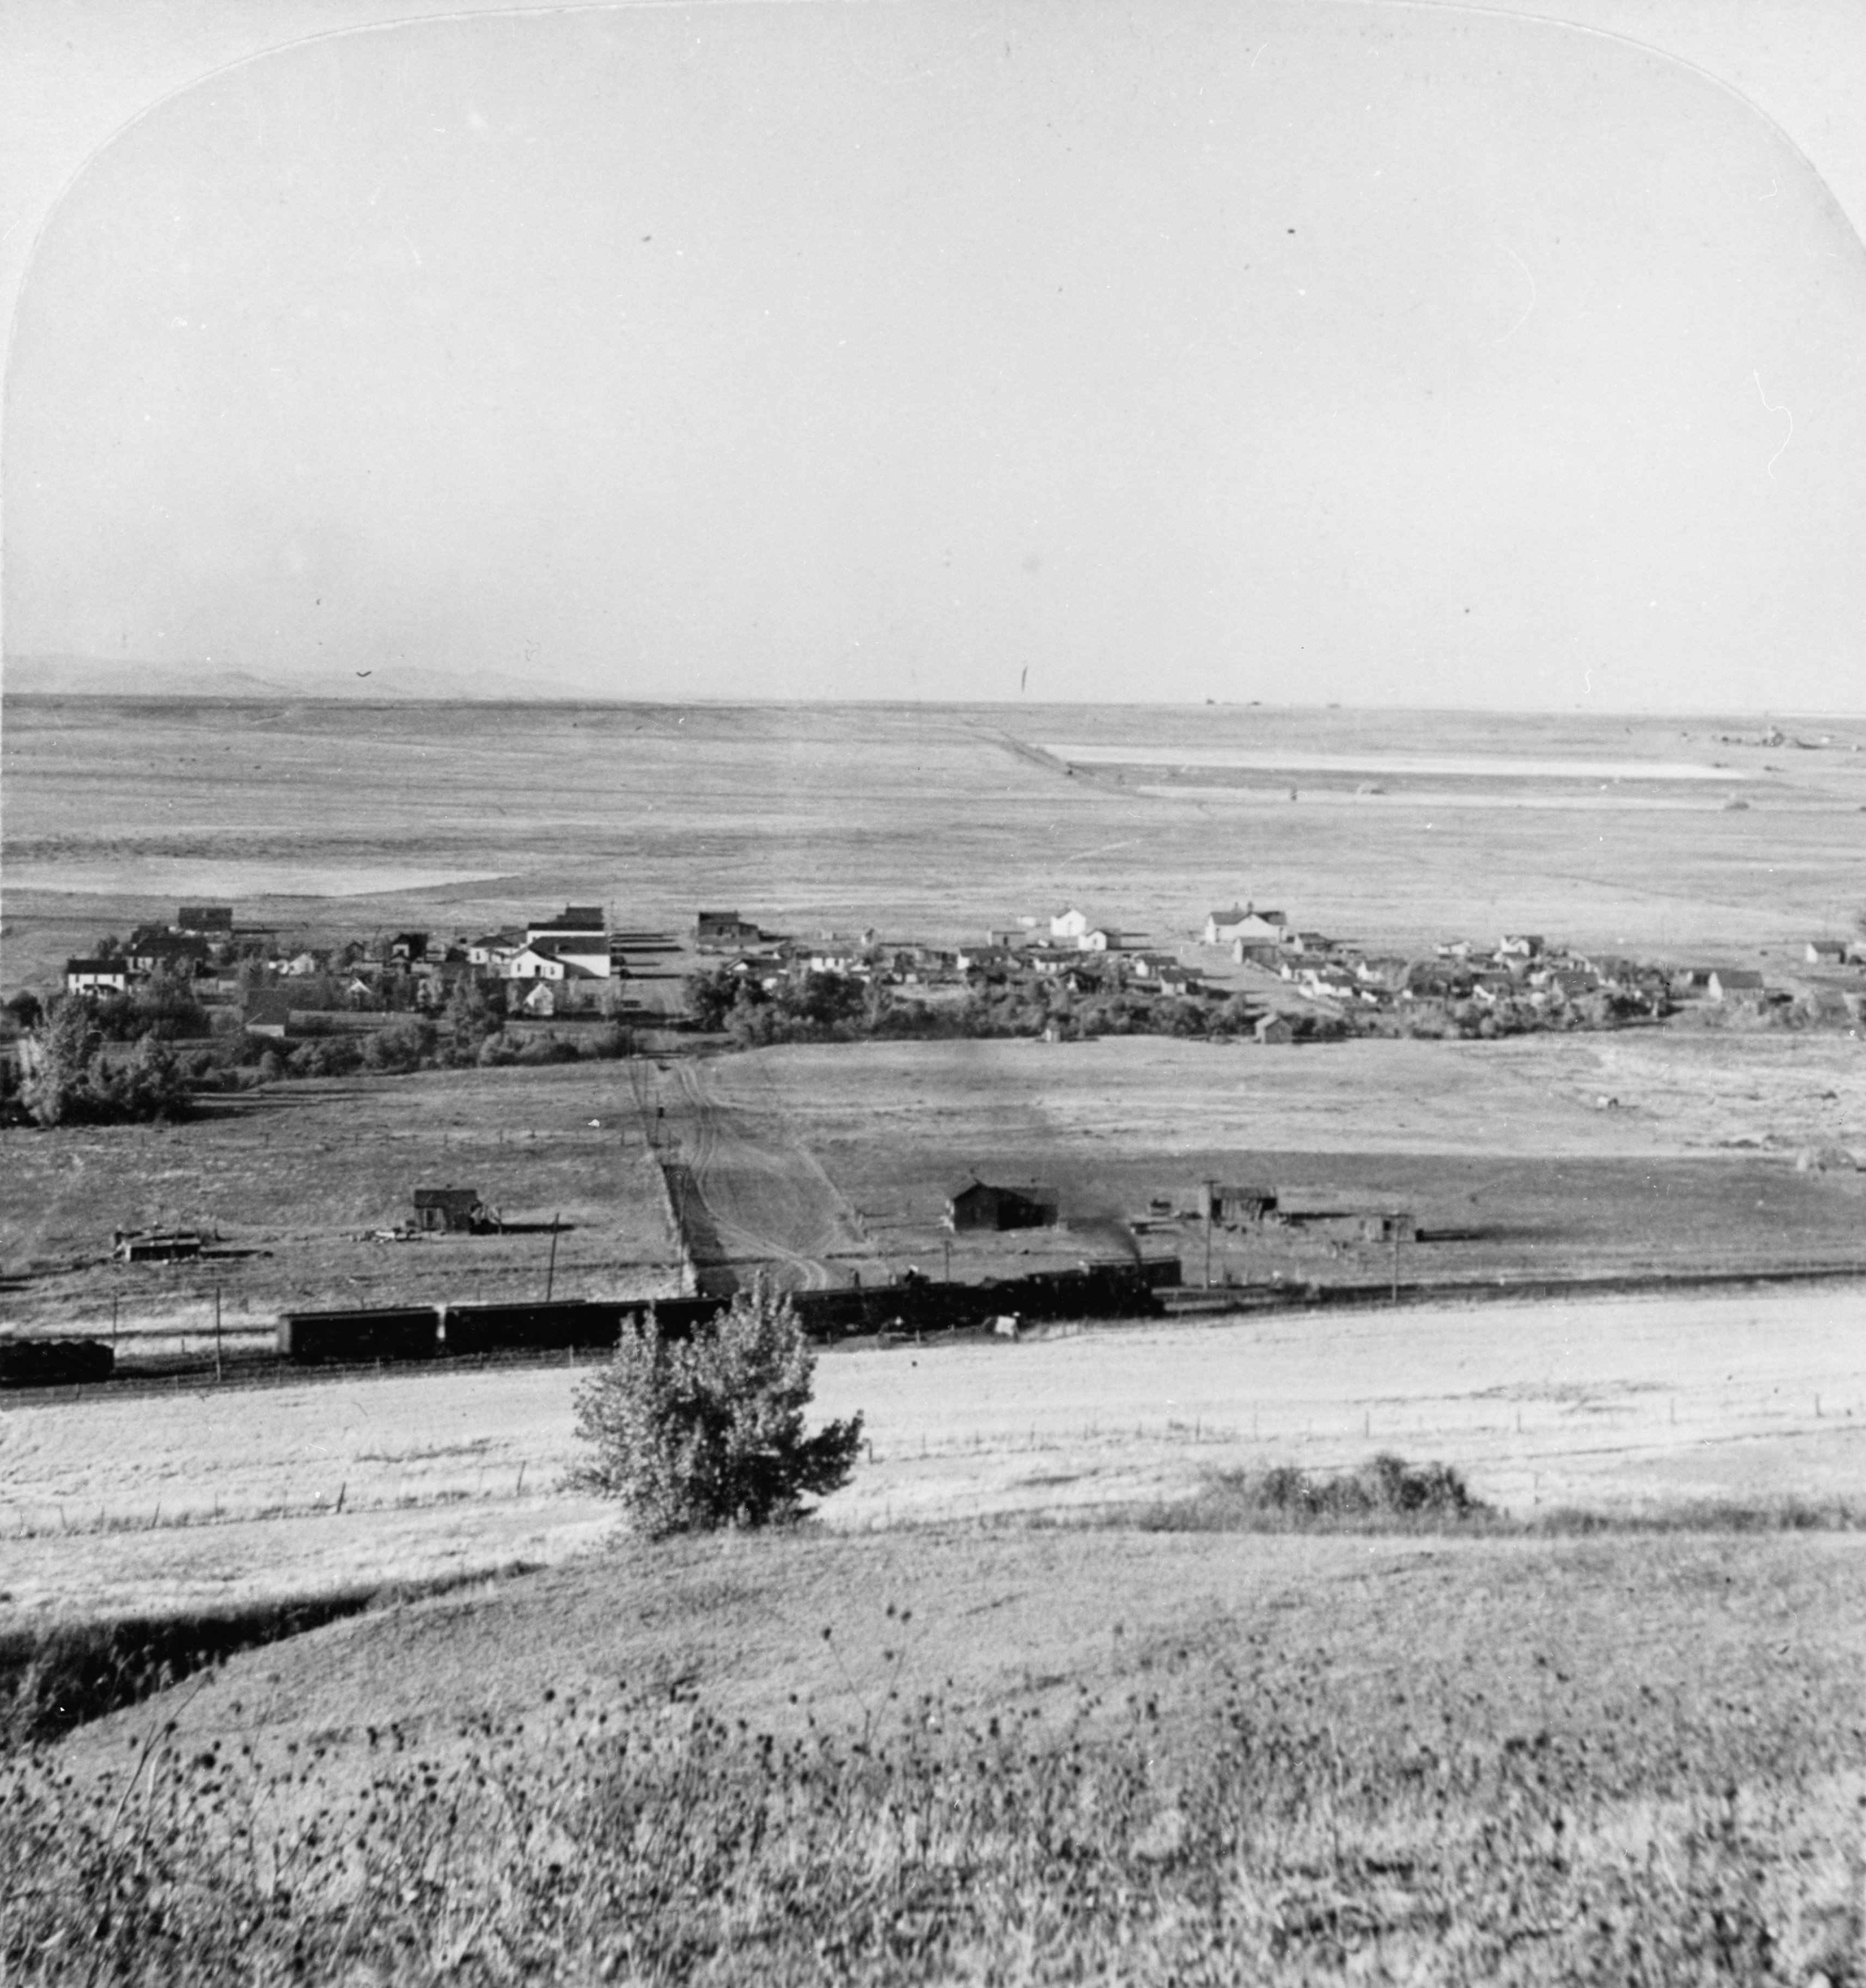 A historic photo of a small town with the prairie stretching out behind it. The railroad runs parallel to the town.